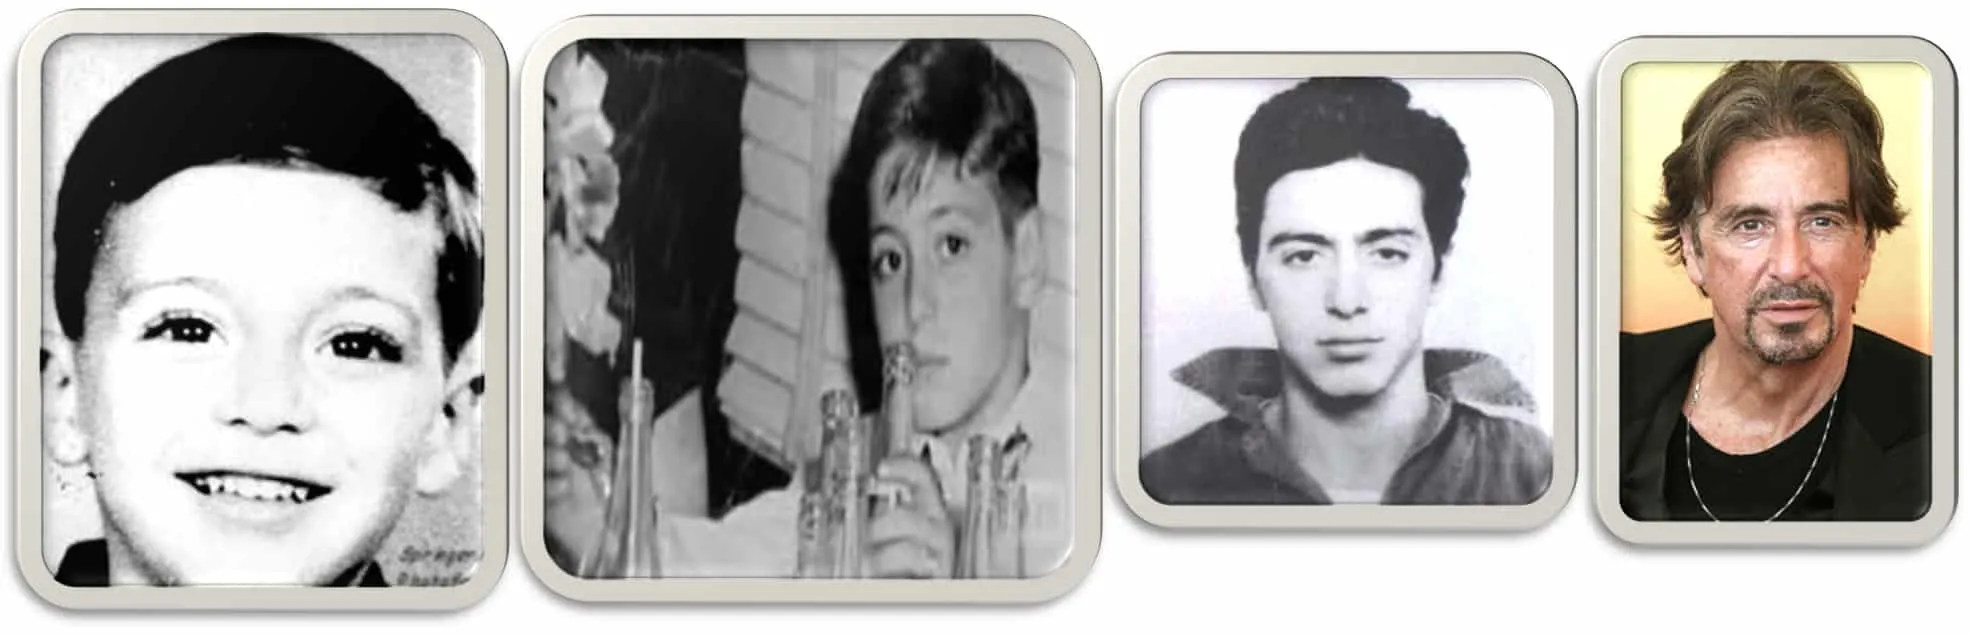 Al Pacino Biography - From his Childhood Years to the Moment of Fame.